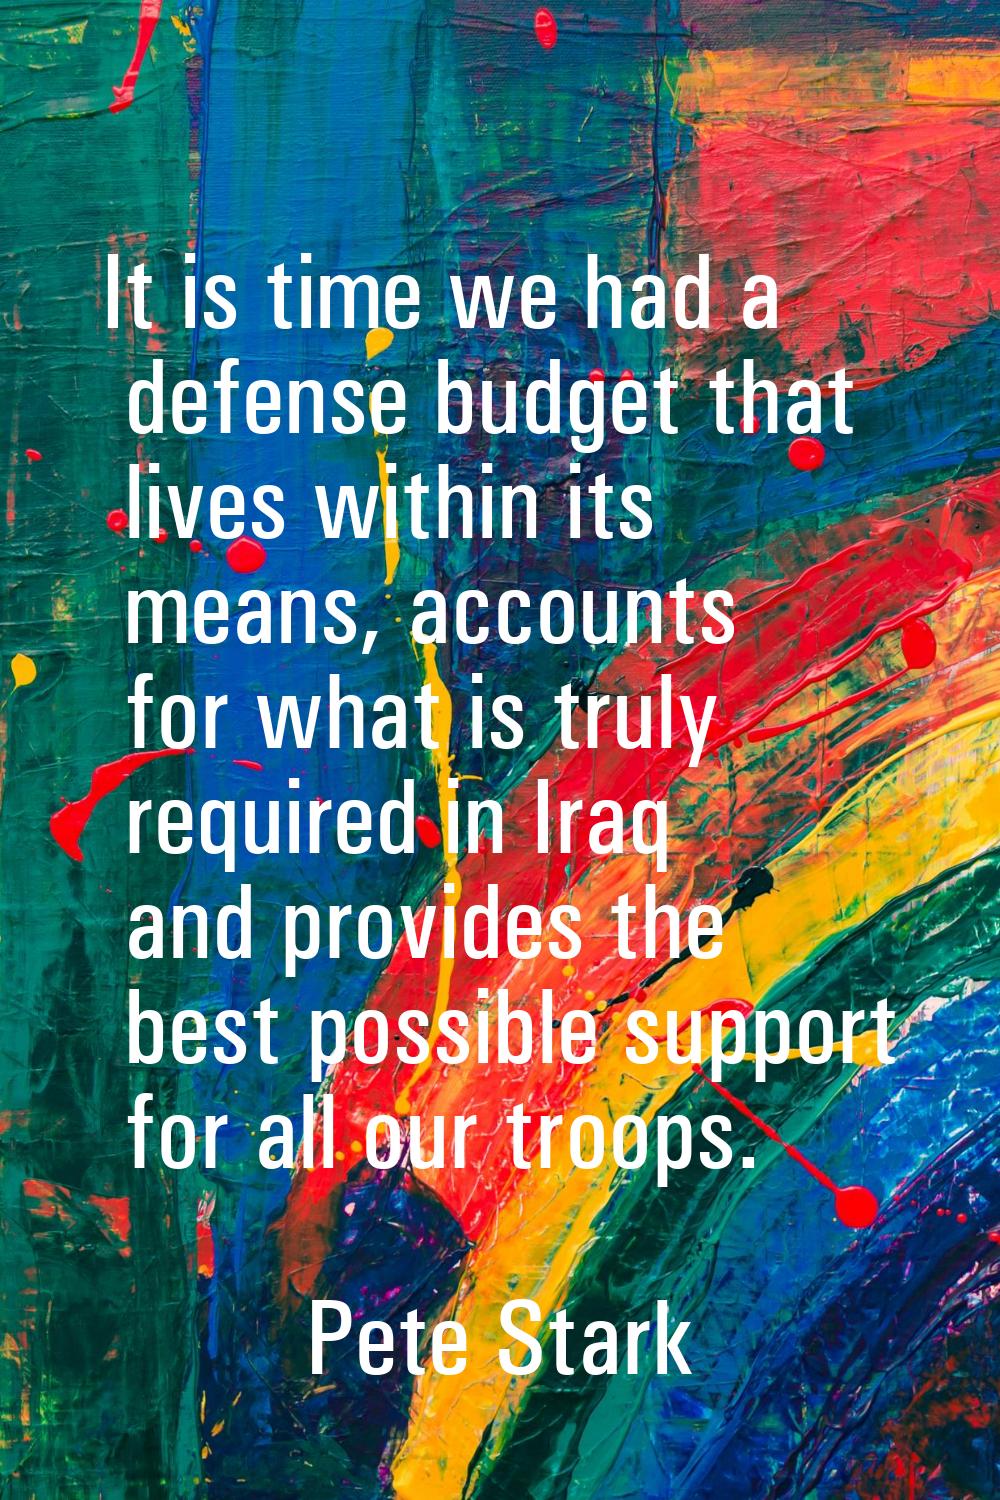 It is time we had a defense budget that lives within its means, accounts for what is truly required